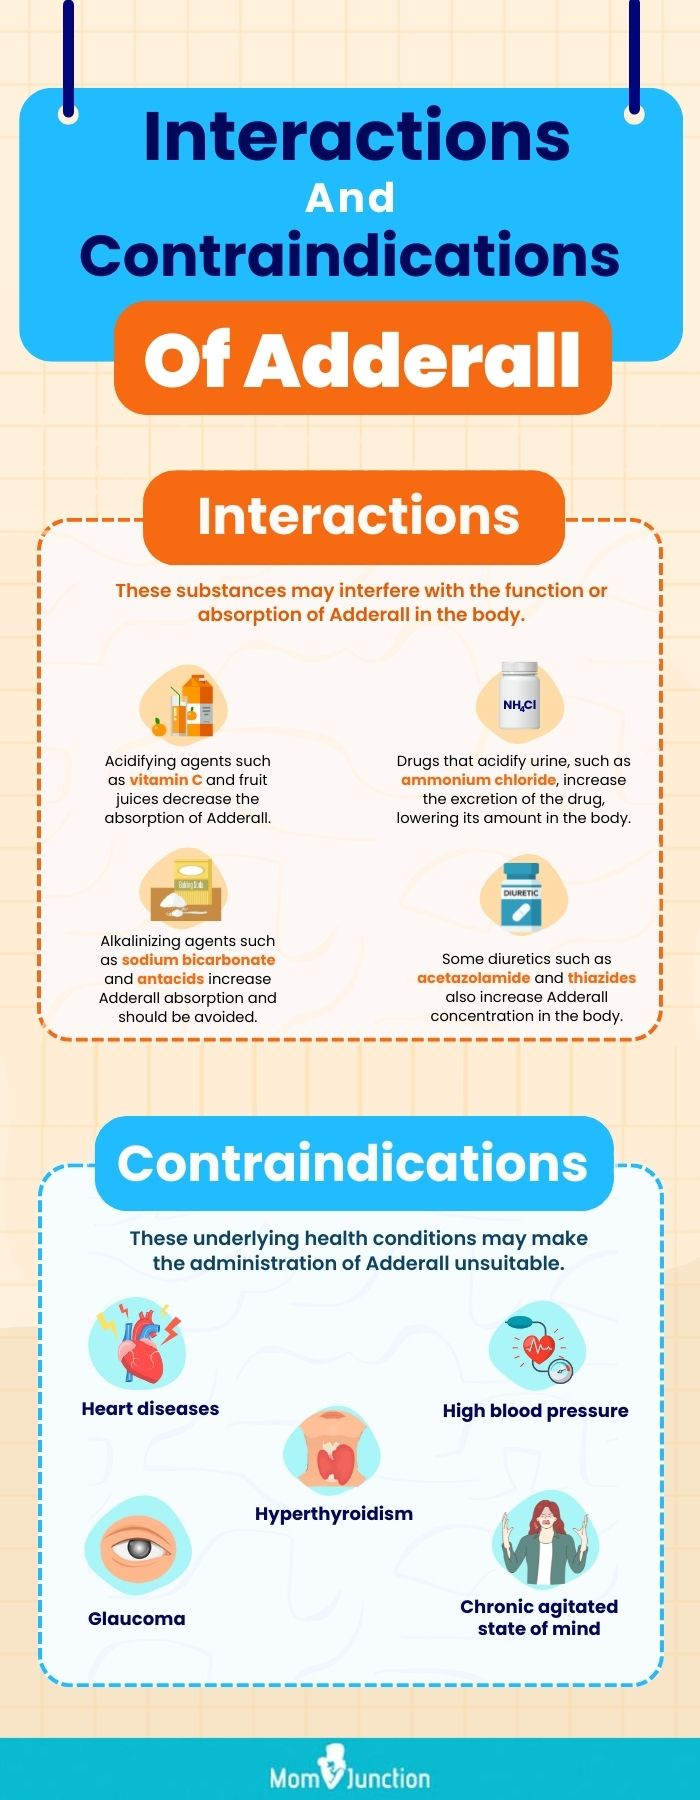 interactions and contraindications of adderall (infographic)